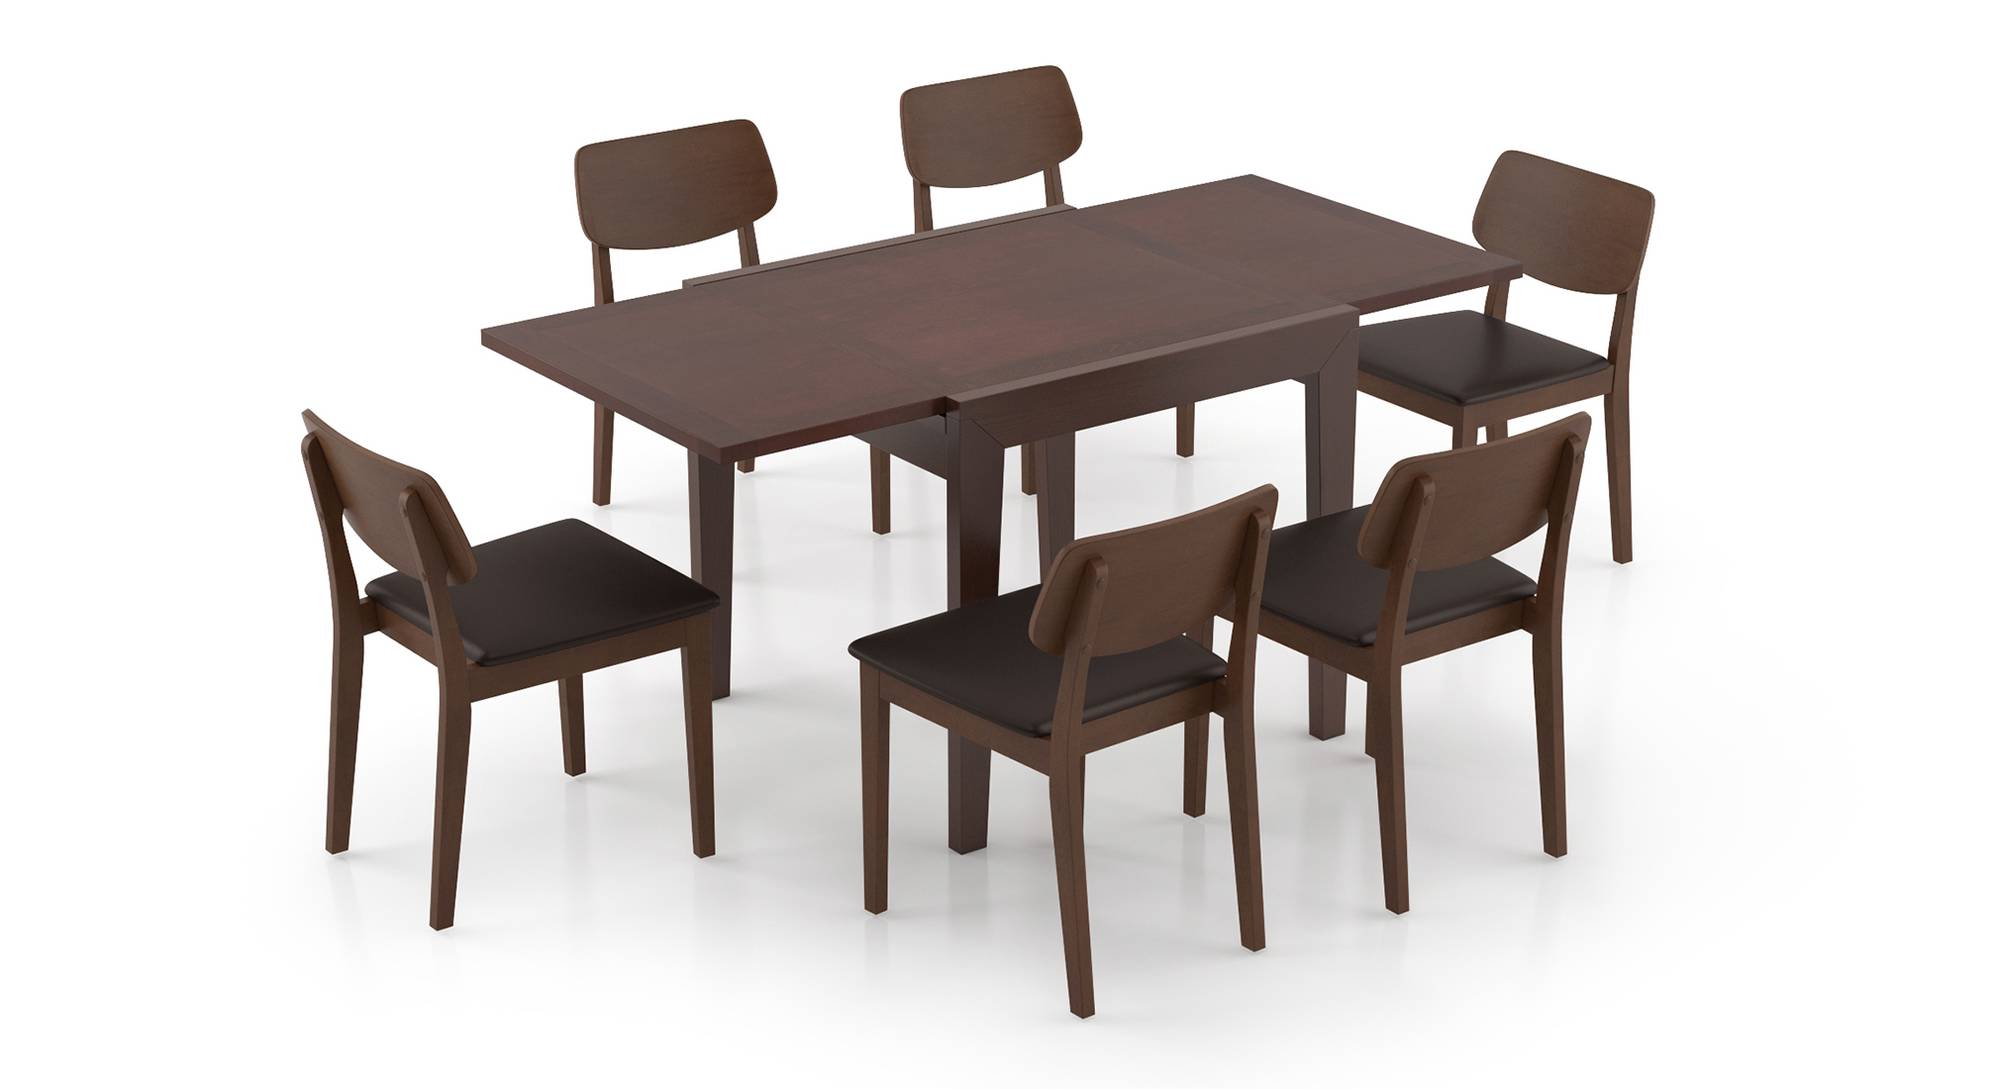 Lawson 6 Seater Dining Table Set, Brown Dining Table